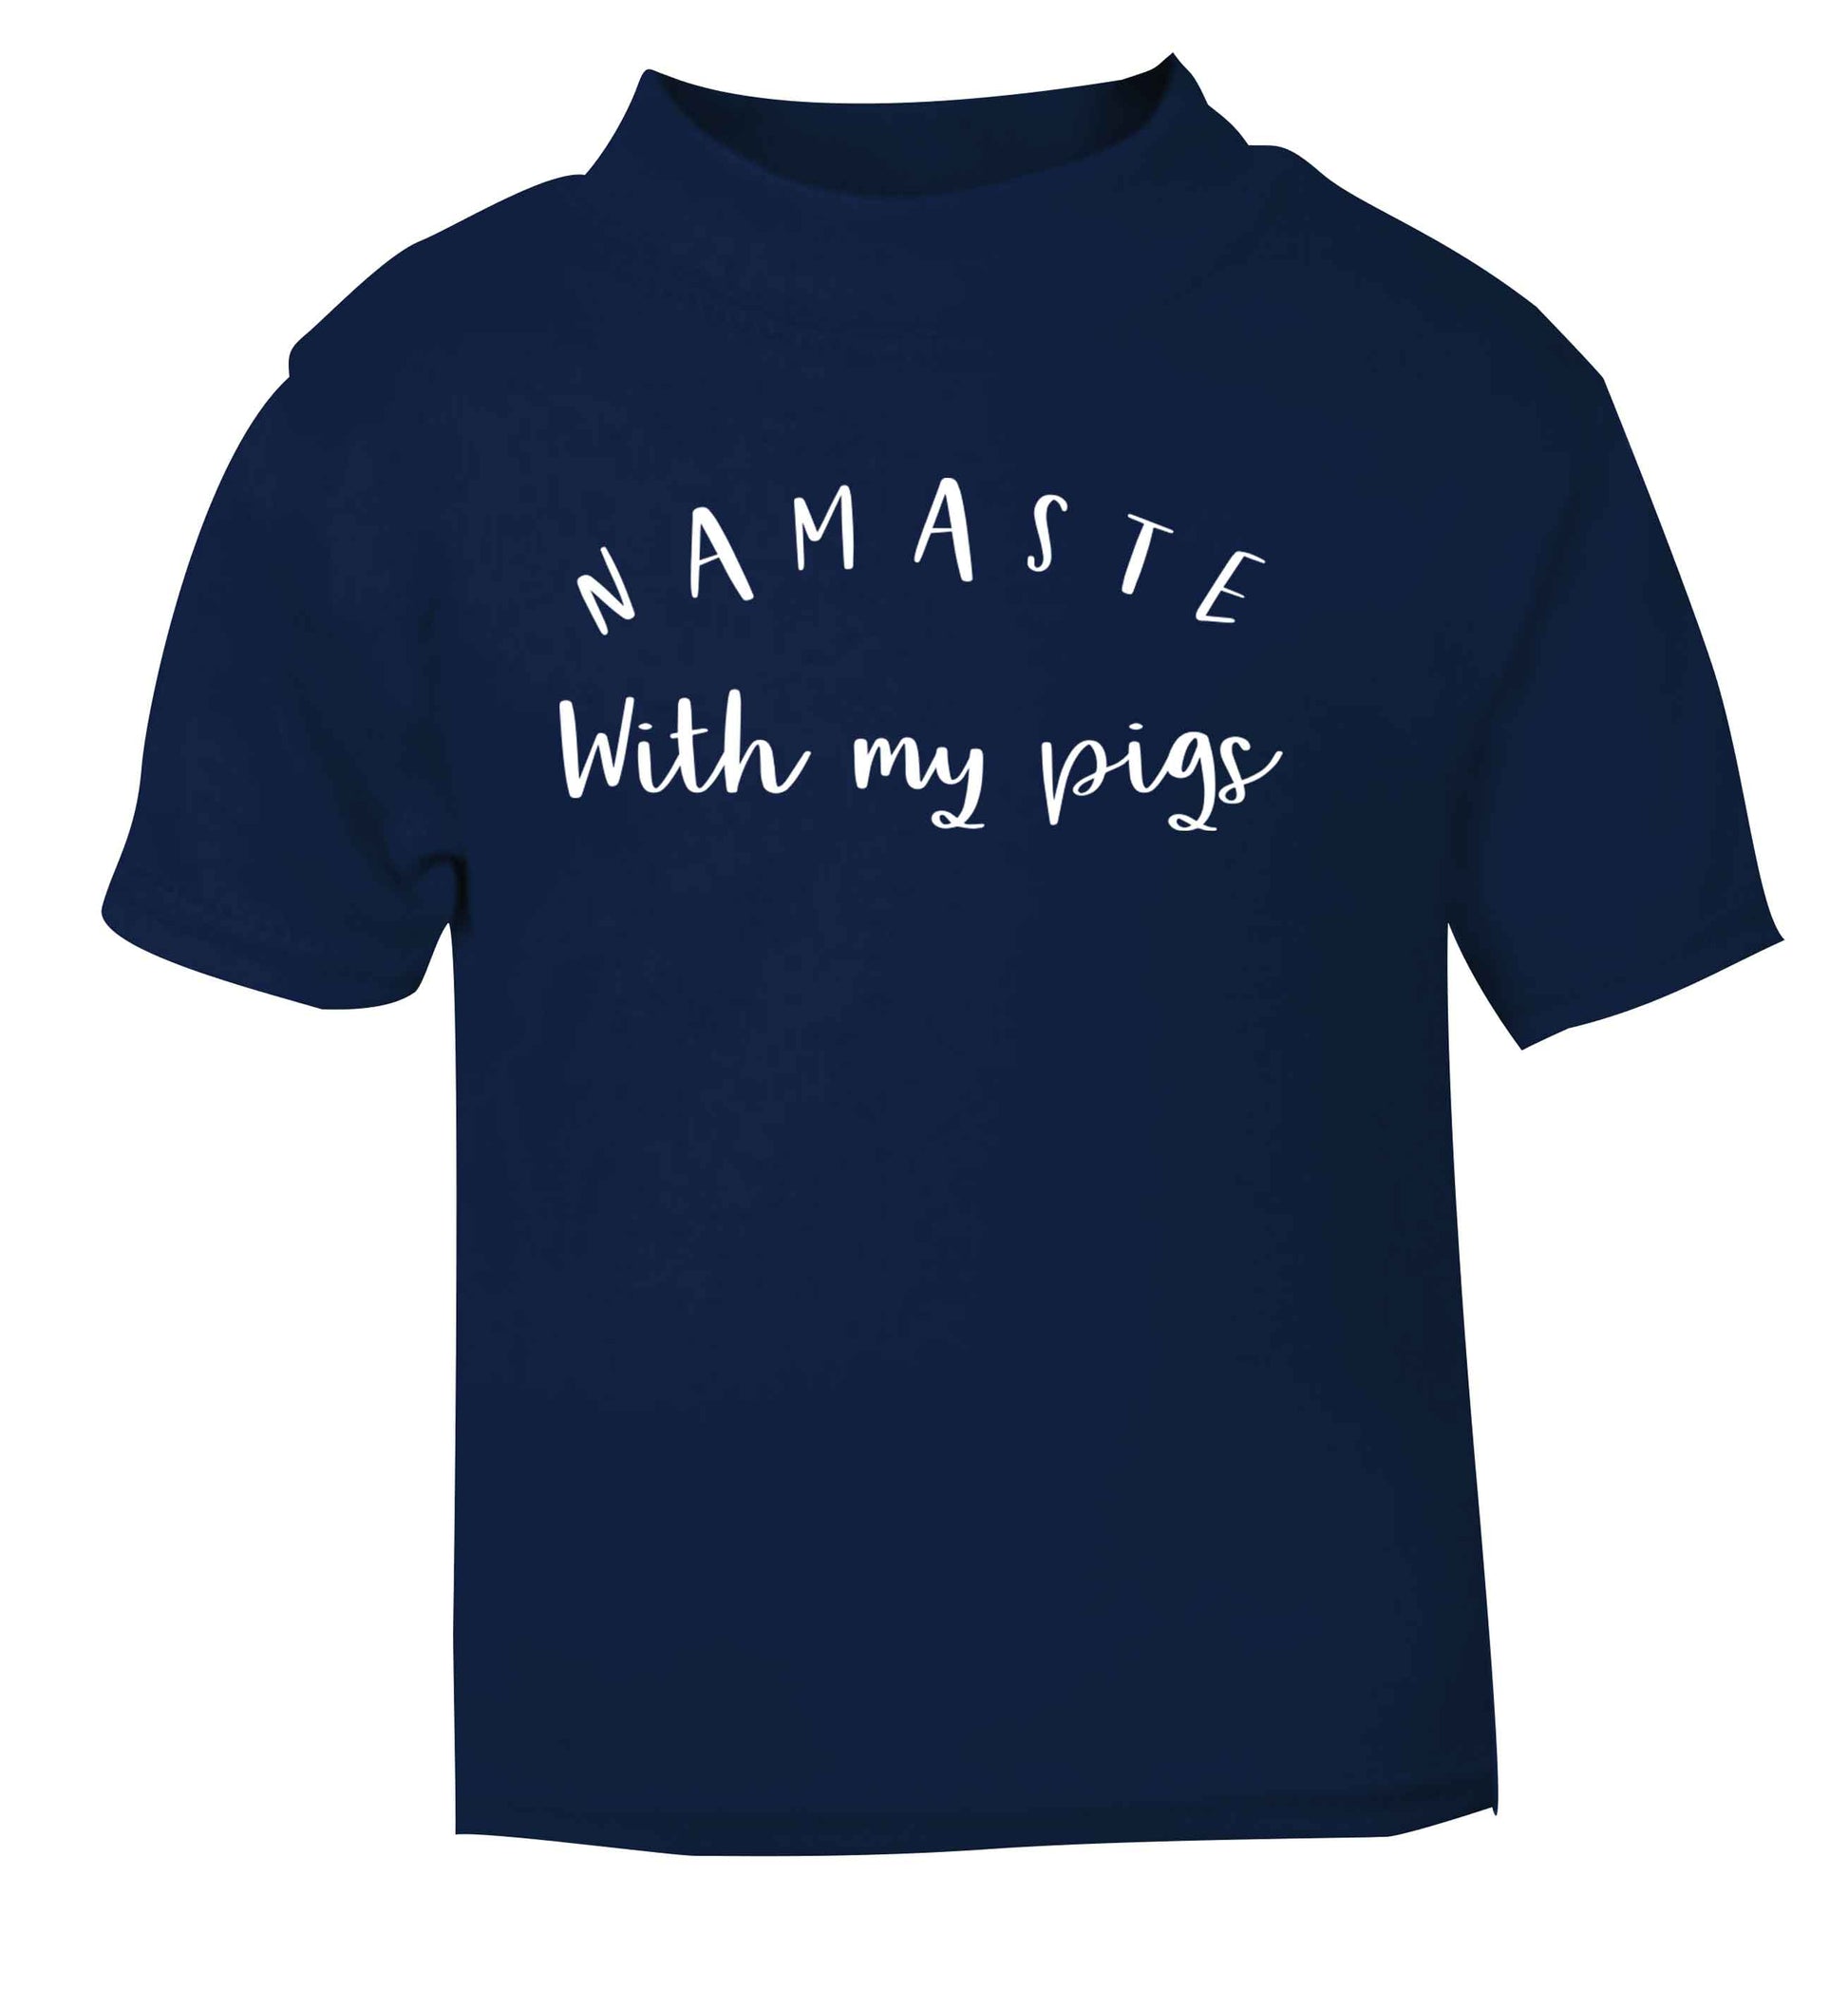 Namaste with my pigs navy Baby Toddler Tshirt 2 Years